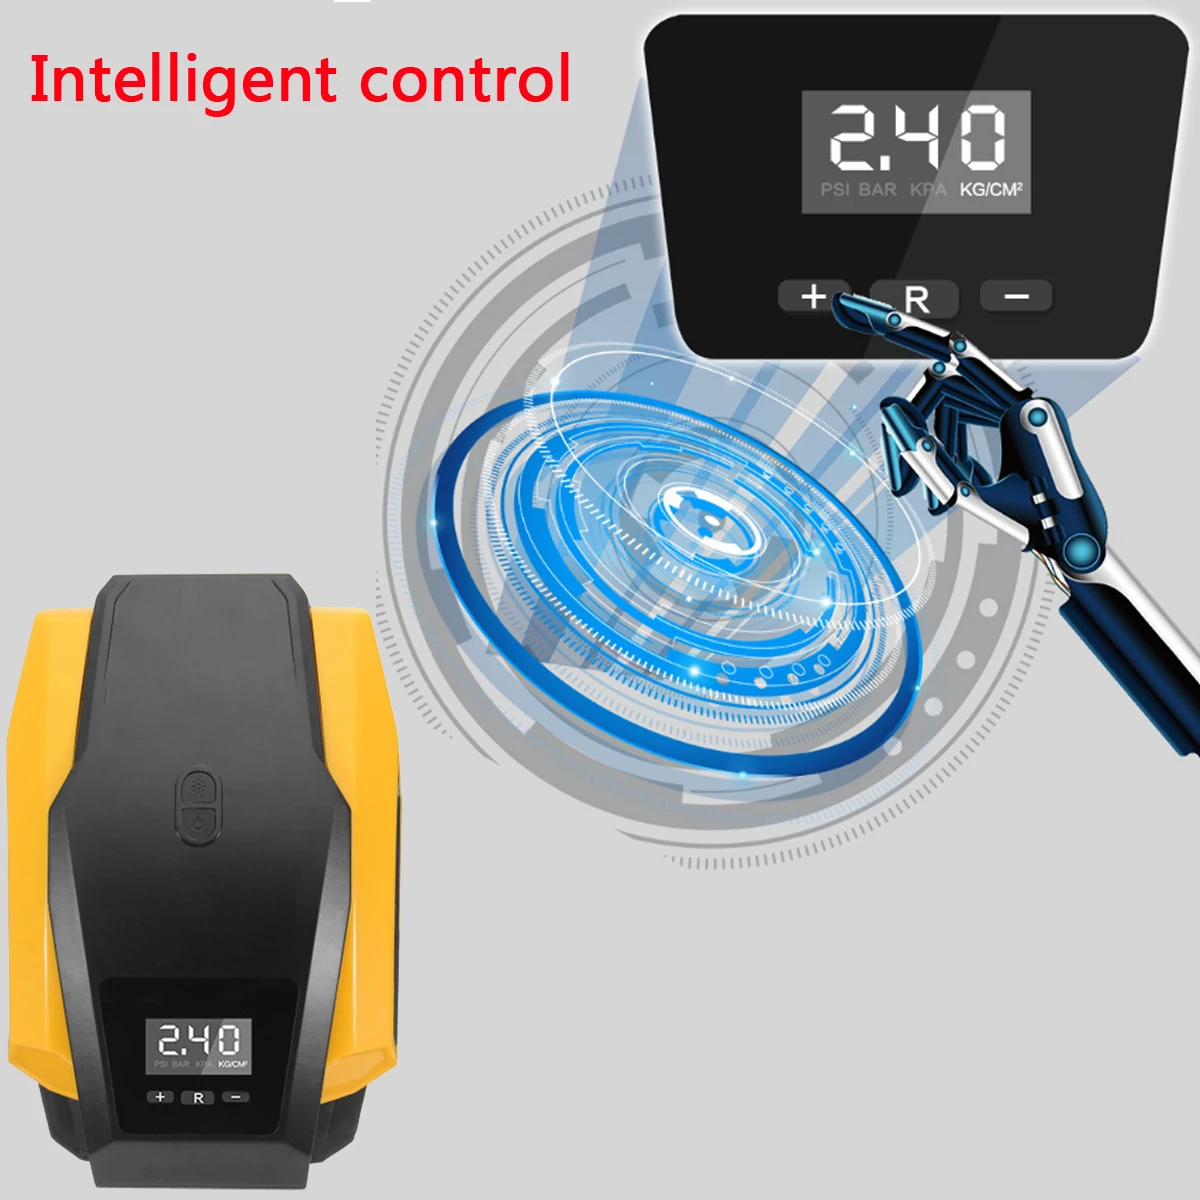 12V 120W 260PSI Tire Inflator Electric Air Compressor Digital Display/Pointer With LED Light For Motorcycle